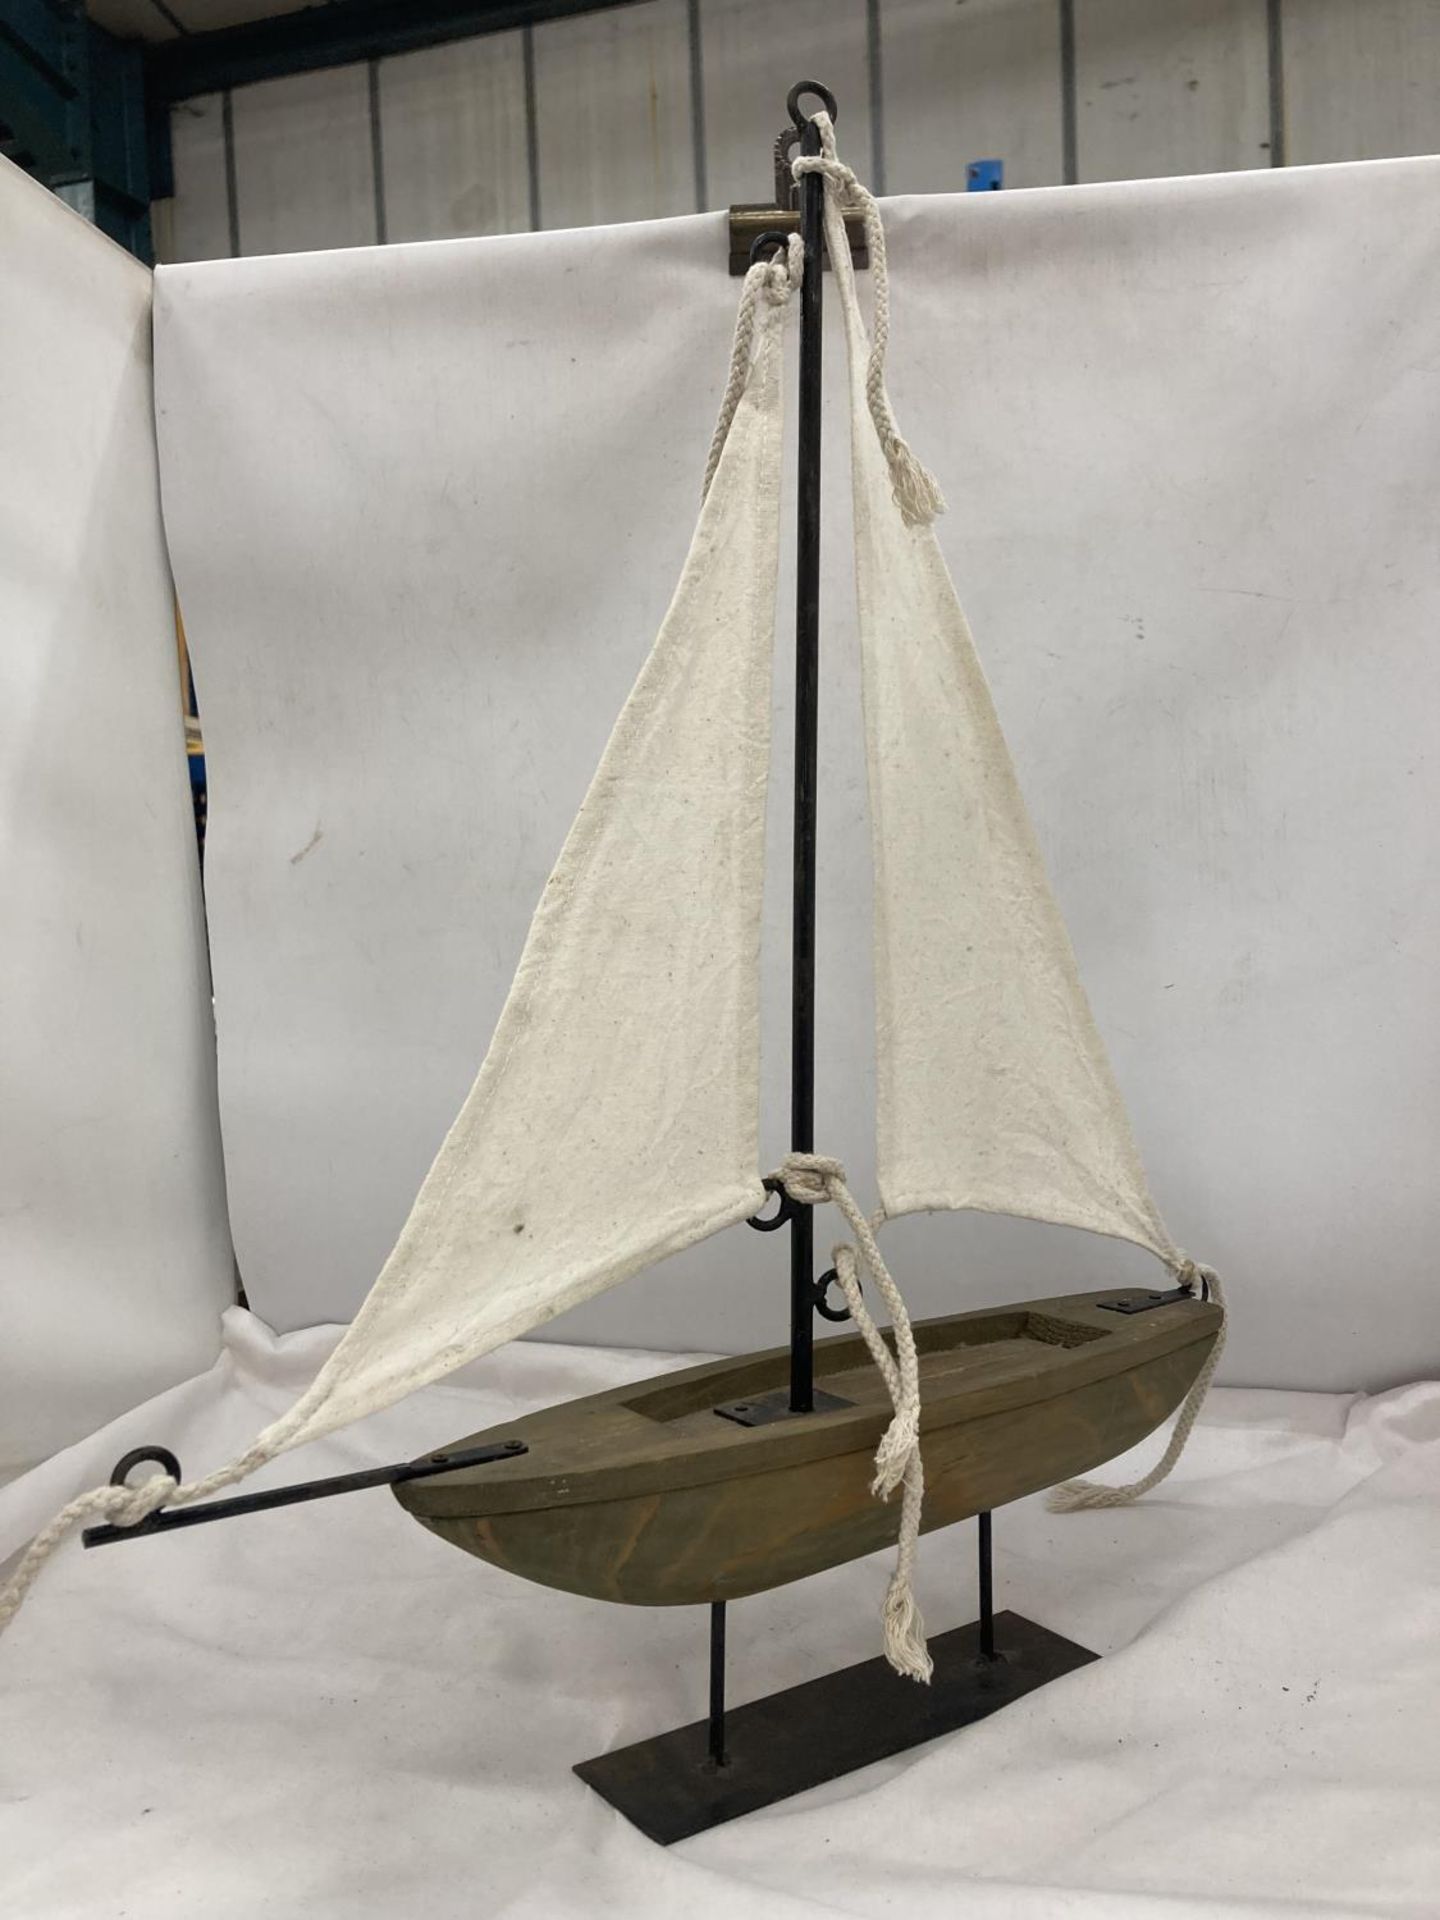 A VINTAGE WOODEN SAILING BOAT ON A DISPLAY PLINT, HEIGHT 56CM, LENGTH 46CM - Image 2 of 2